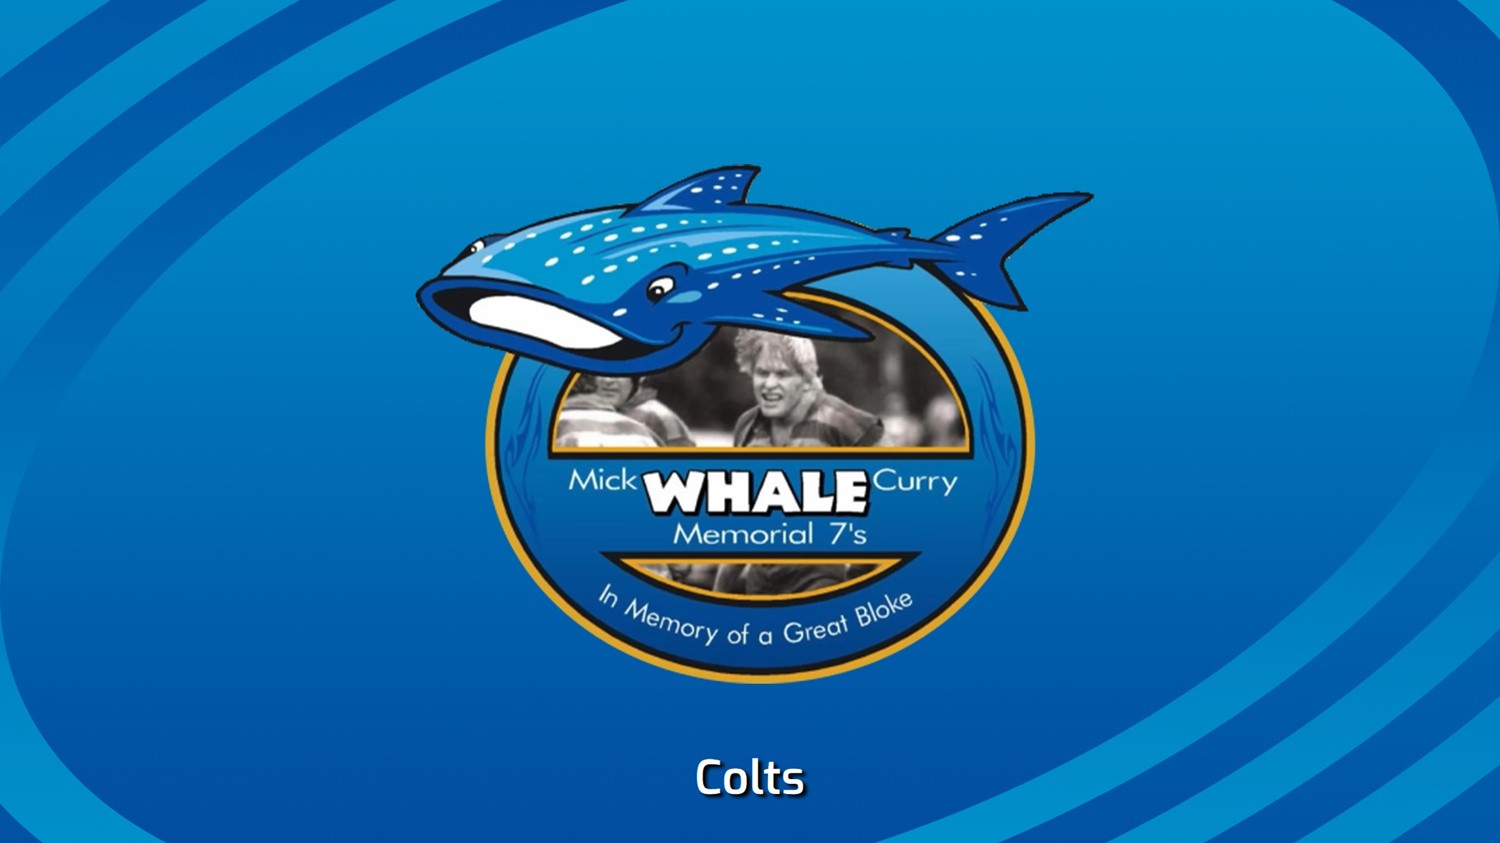 240210-Mick "Whale" Curry Memorial Rugby Sevens Colts - Gordon v Hunter Wildfires Minigame Slate Image